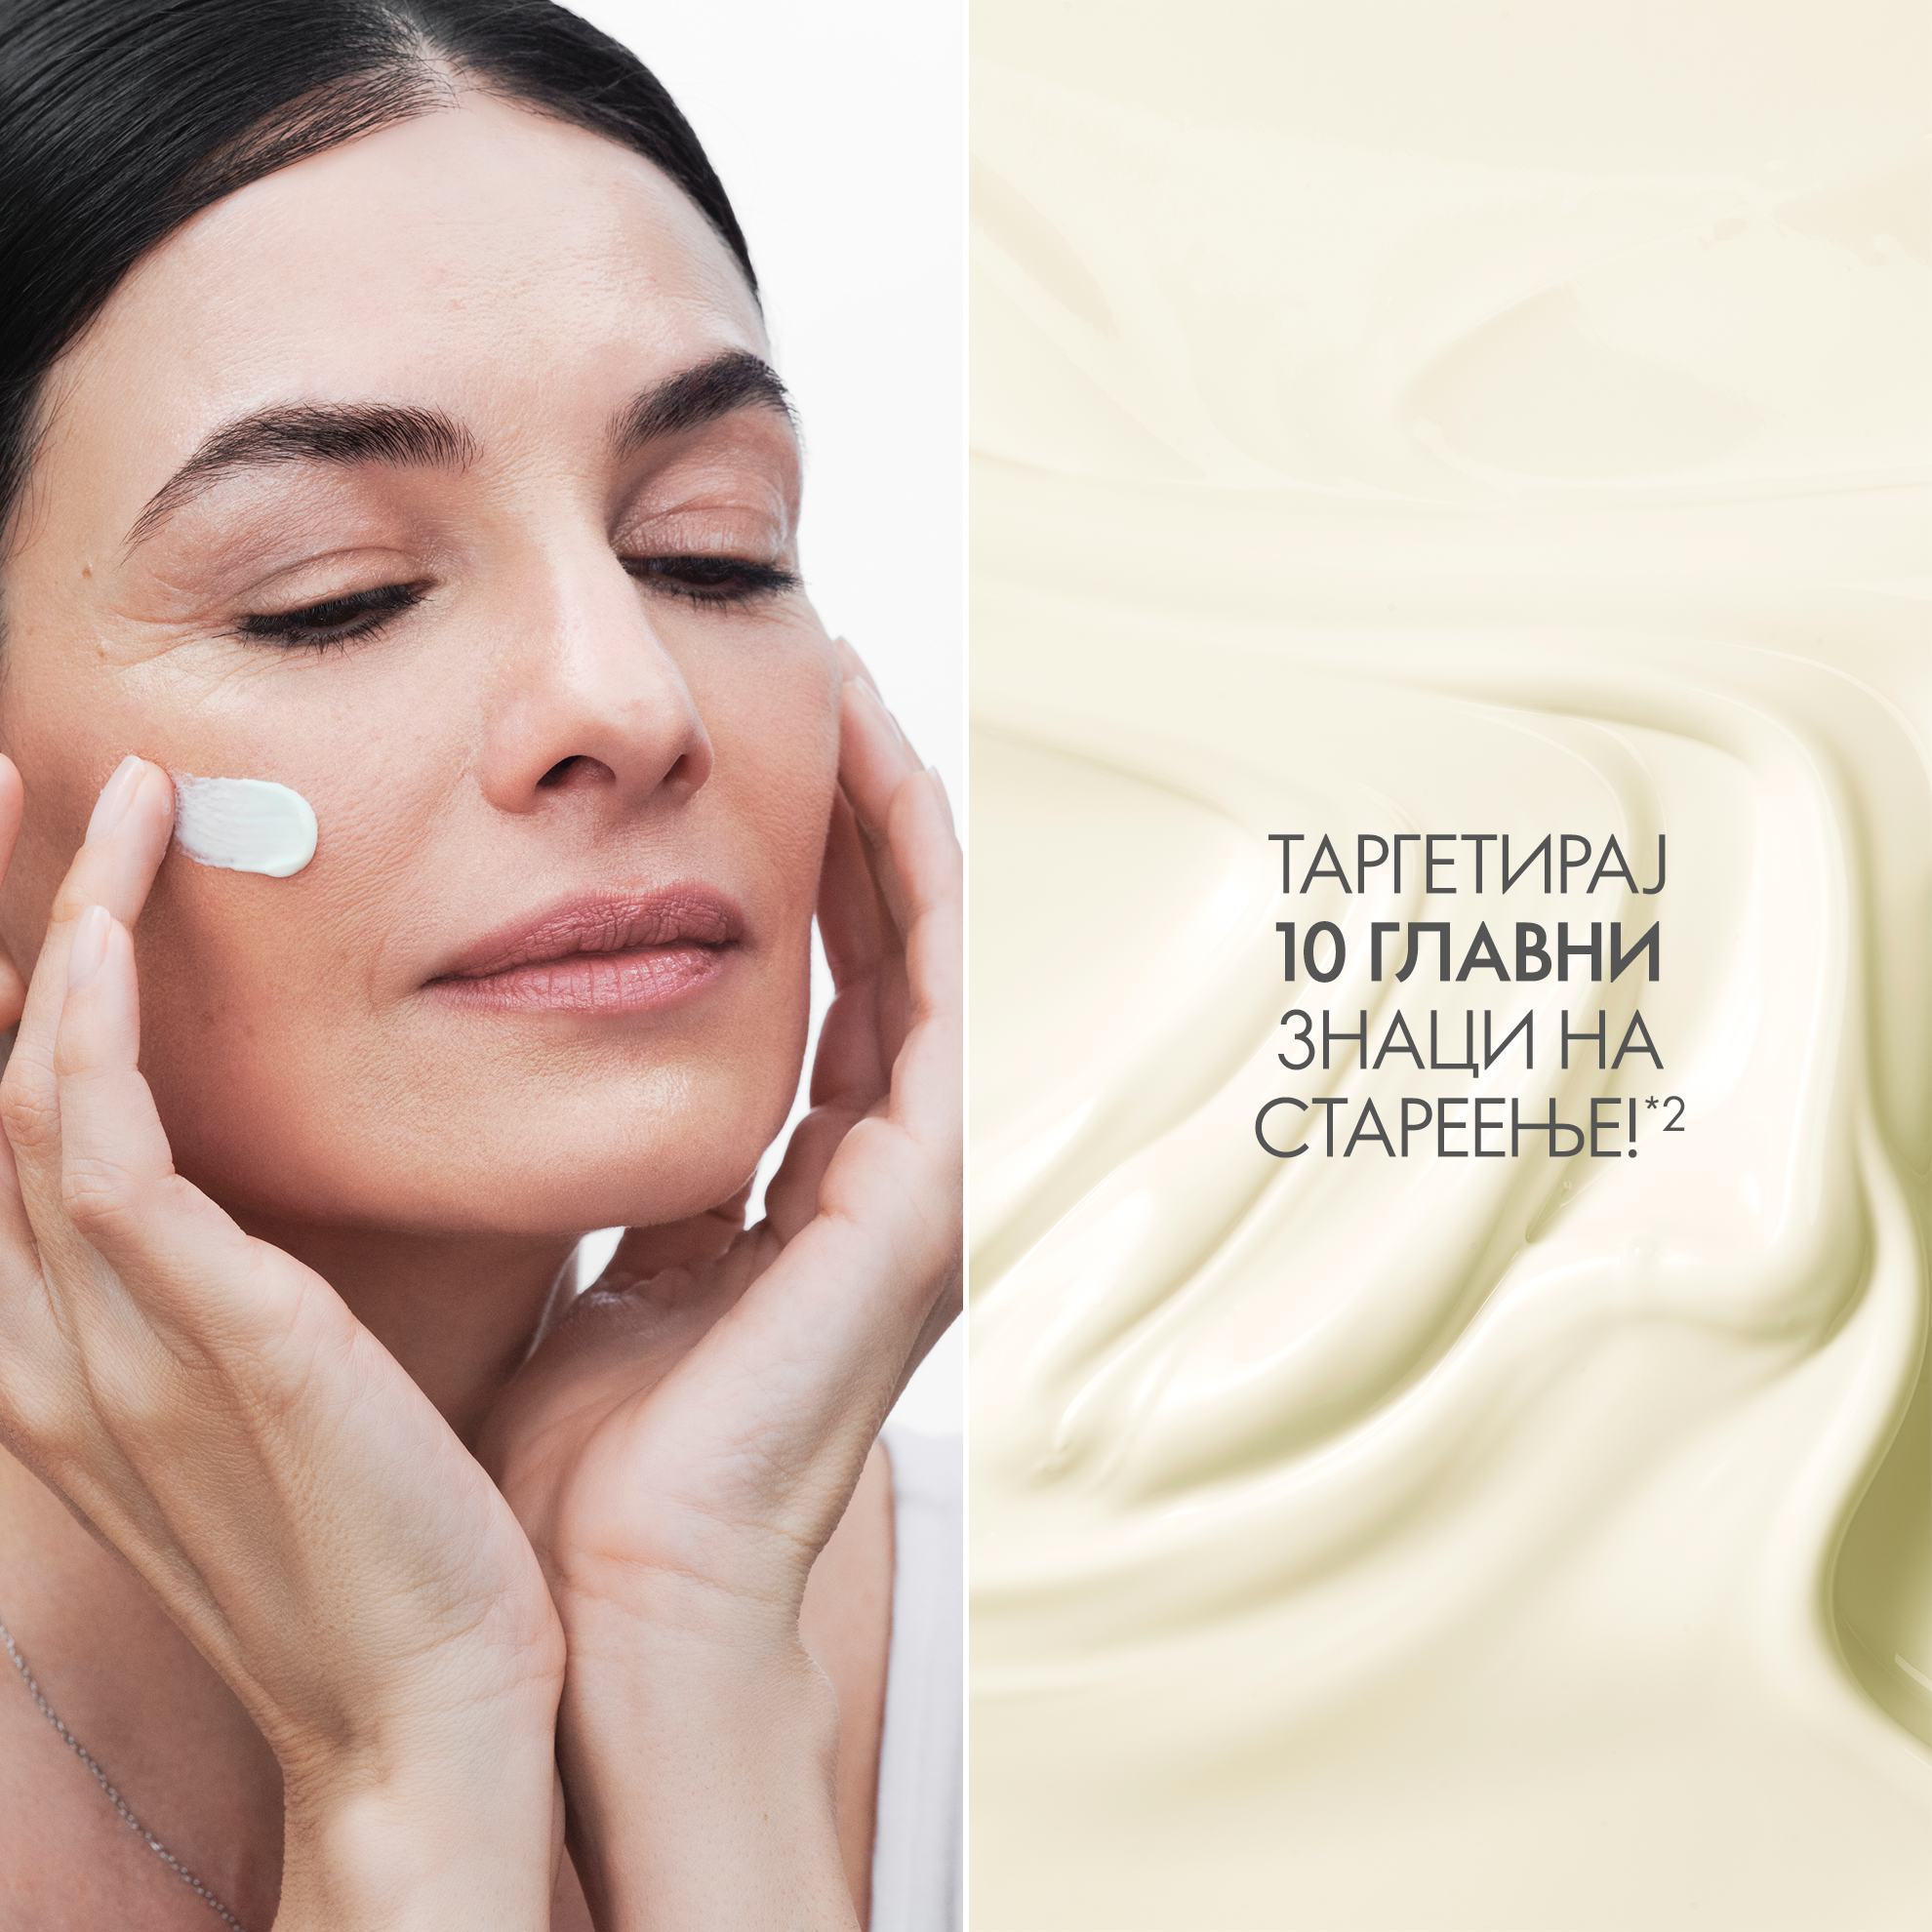 https://media-cdn.oriflame.com/productImage?externalMediaId=product-management-media%2fProducts%2f41048%2fMK%2f41048_2.png&id=17583831&version=2